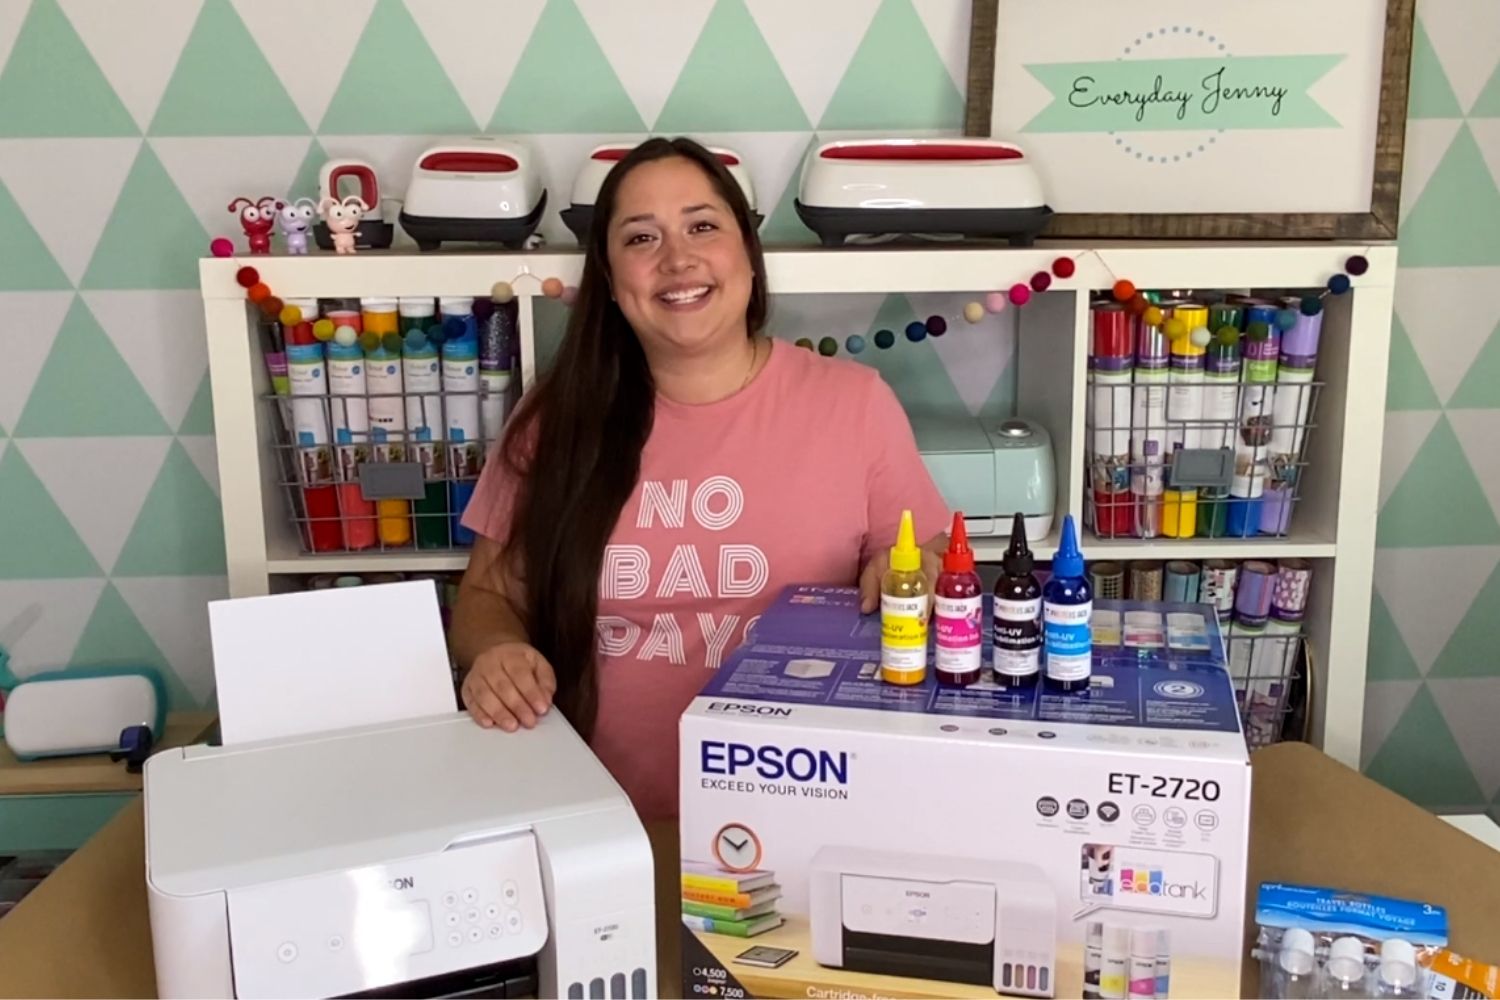 HOW CONVERT YOUR EPSON 2720 (ET-2720) INTO A SUBLIMATION PRINTER | EVERYDAY JENNY